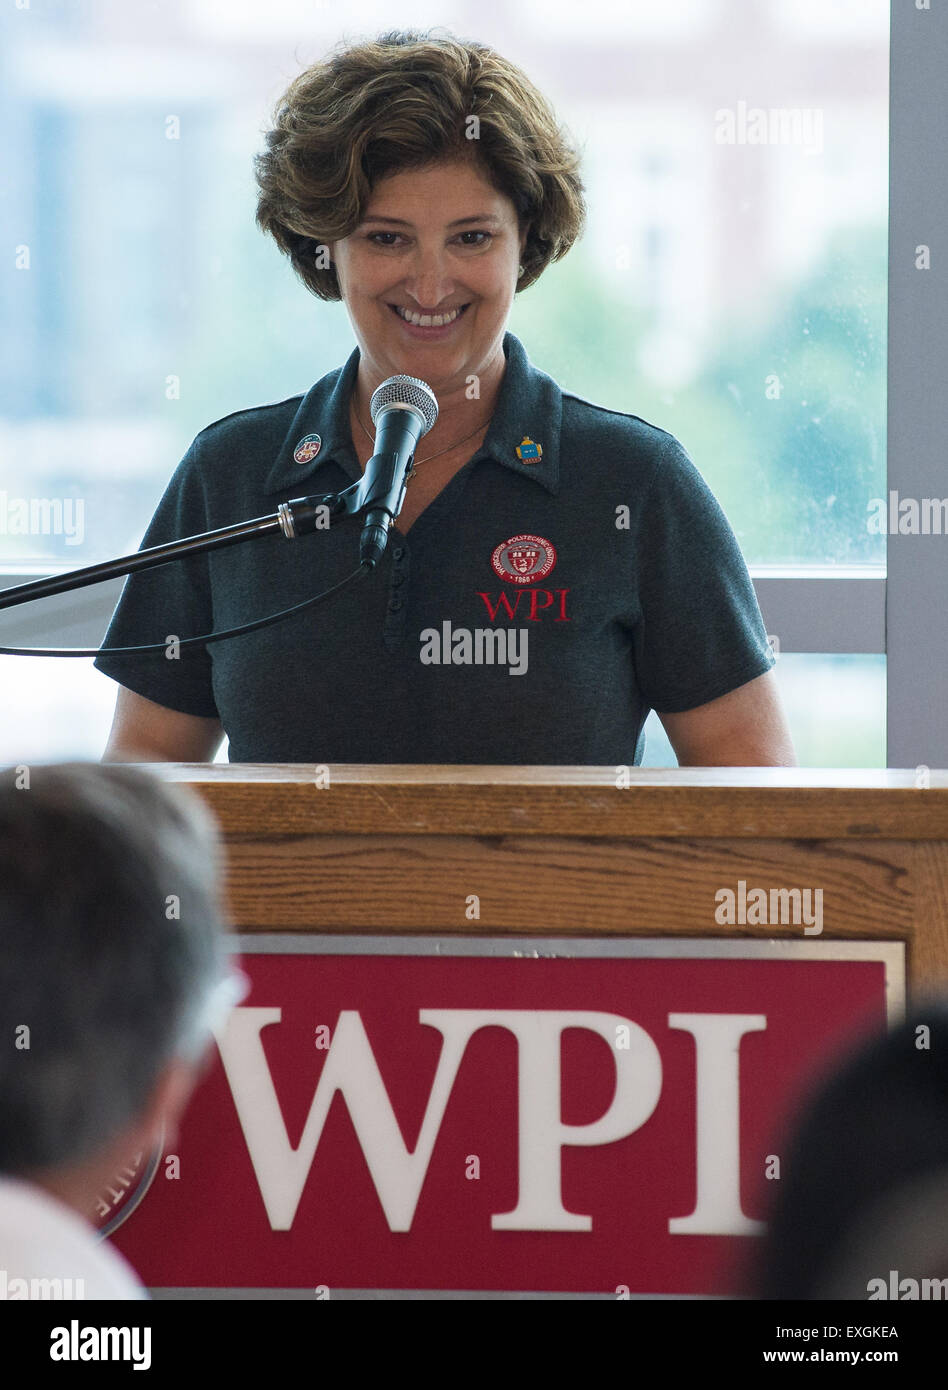 Worcester Polytechnic Institute (WPI) President Laurie Leshin speaks at a luncheon during the TouchTomorrow Festival, held in conjunction with the 2015 Sample Return Robot Challenge, Saturday, June 13, 2015 at the Worcester Polytechnic Institute (WPI) in Worcester, Mass.  Sixteen teams competed for a $1.5 million NASA prize purse. Teams will be required to demonstrate autonomous robots that can locate and collect samples from a wide and varied terrain, operating without human control. The objective of this NASA-WPI Centennial Challenge is to encourage innovations in autonomous navigation and r Stock Photo